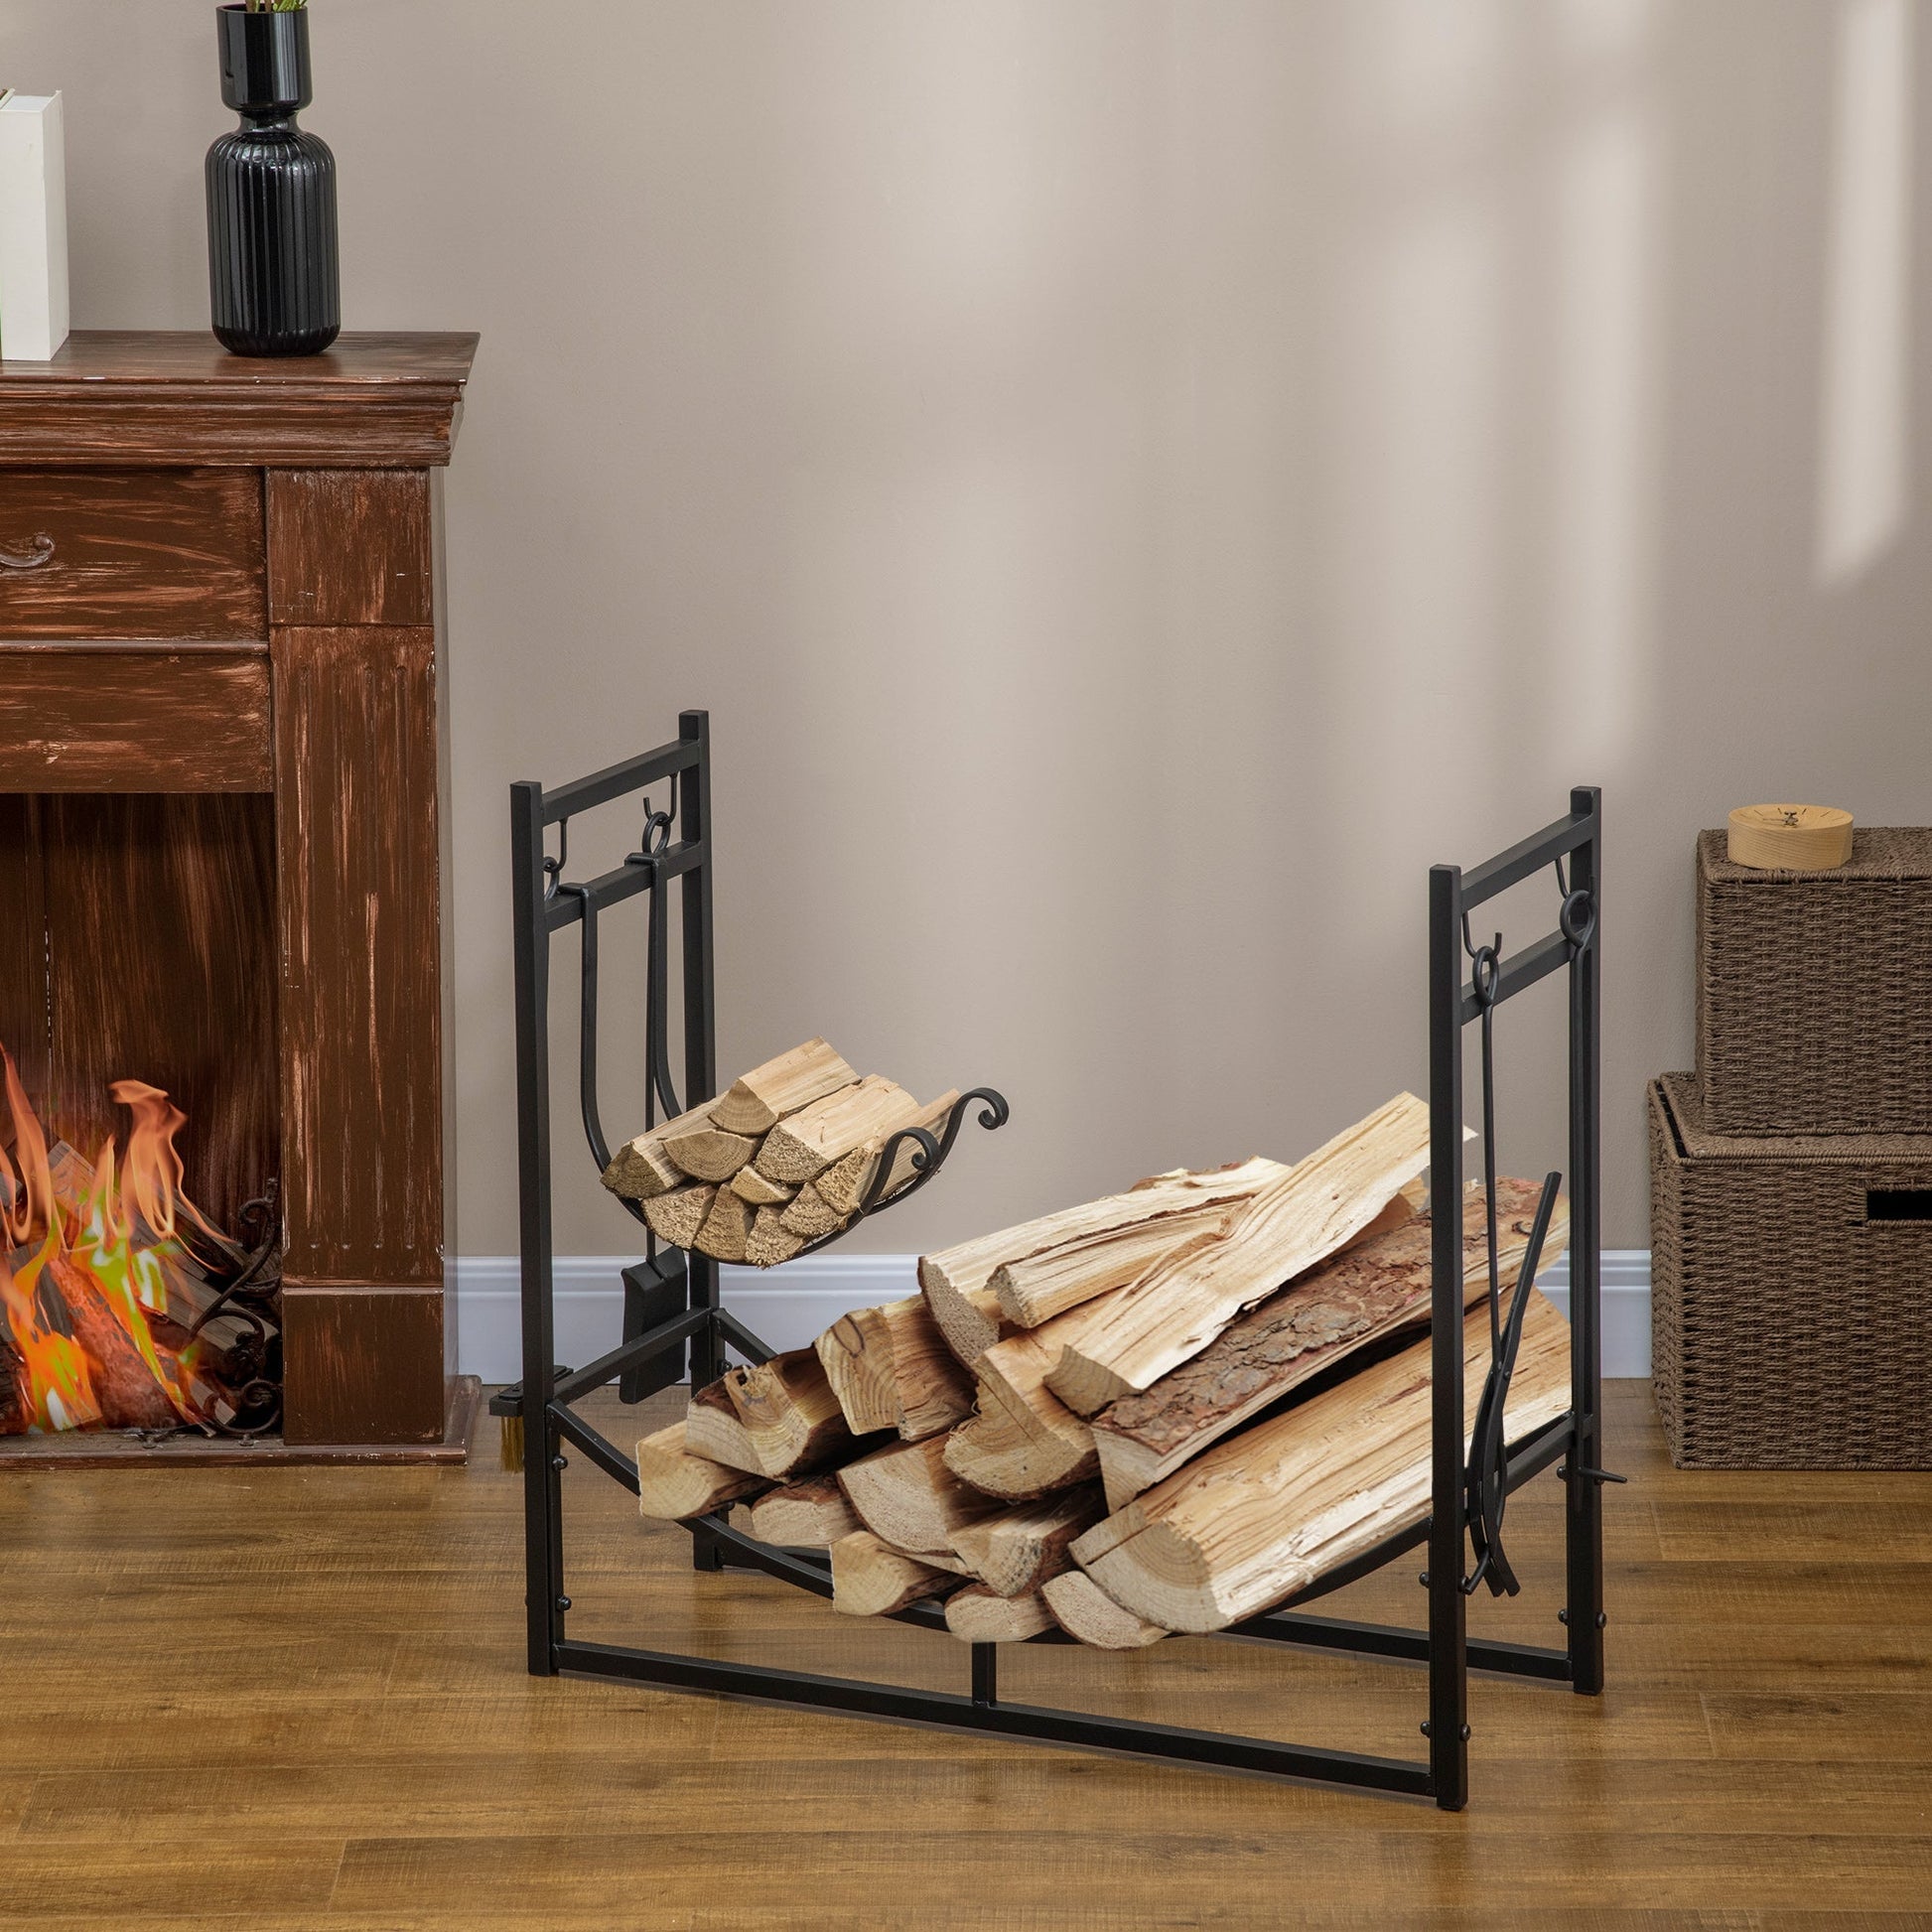 2-Tier Firewood Log Rack with 4 Tools 33" Fireplace Wood Holder Storage Log Rack with Shovel, Broom, Poker, Tongs and Hooks at Gallery Canada